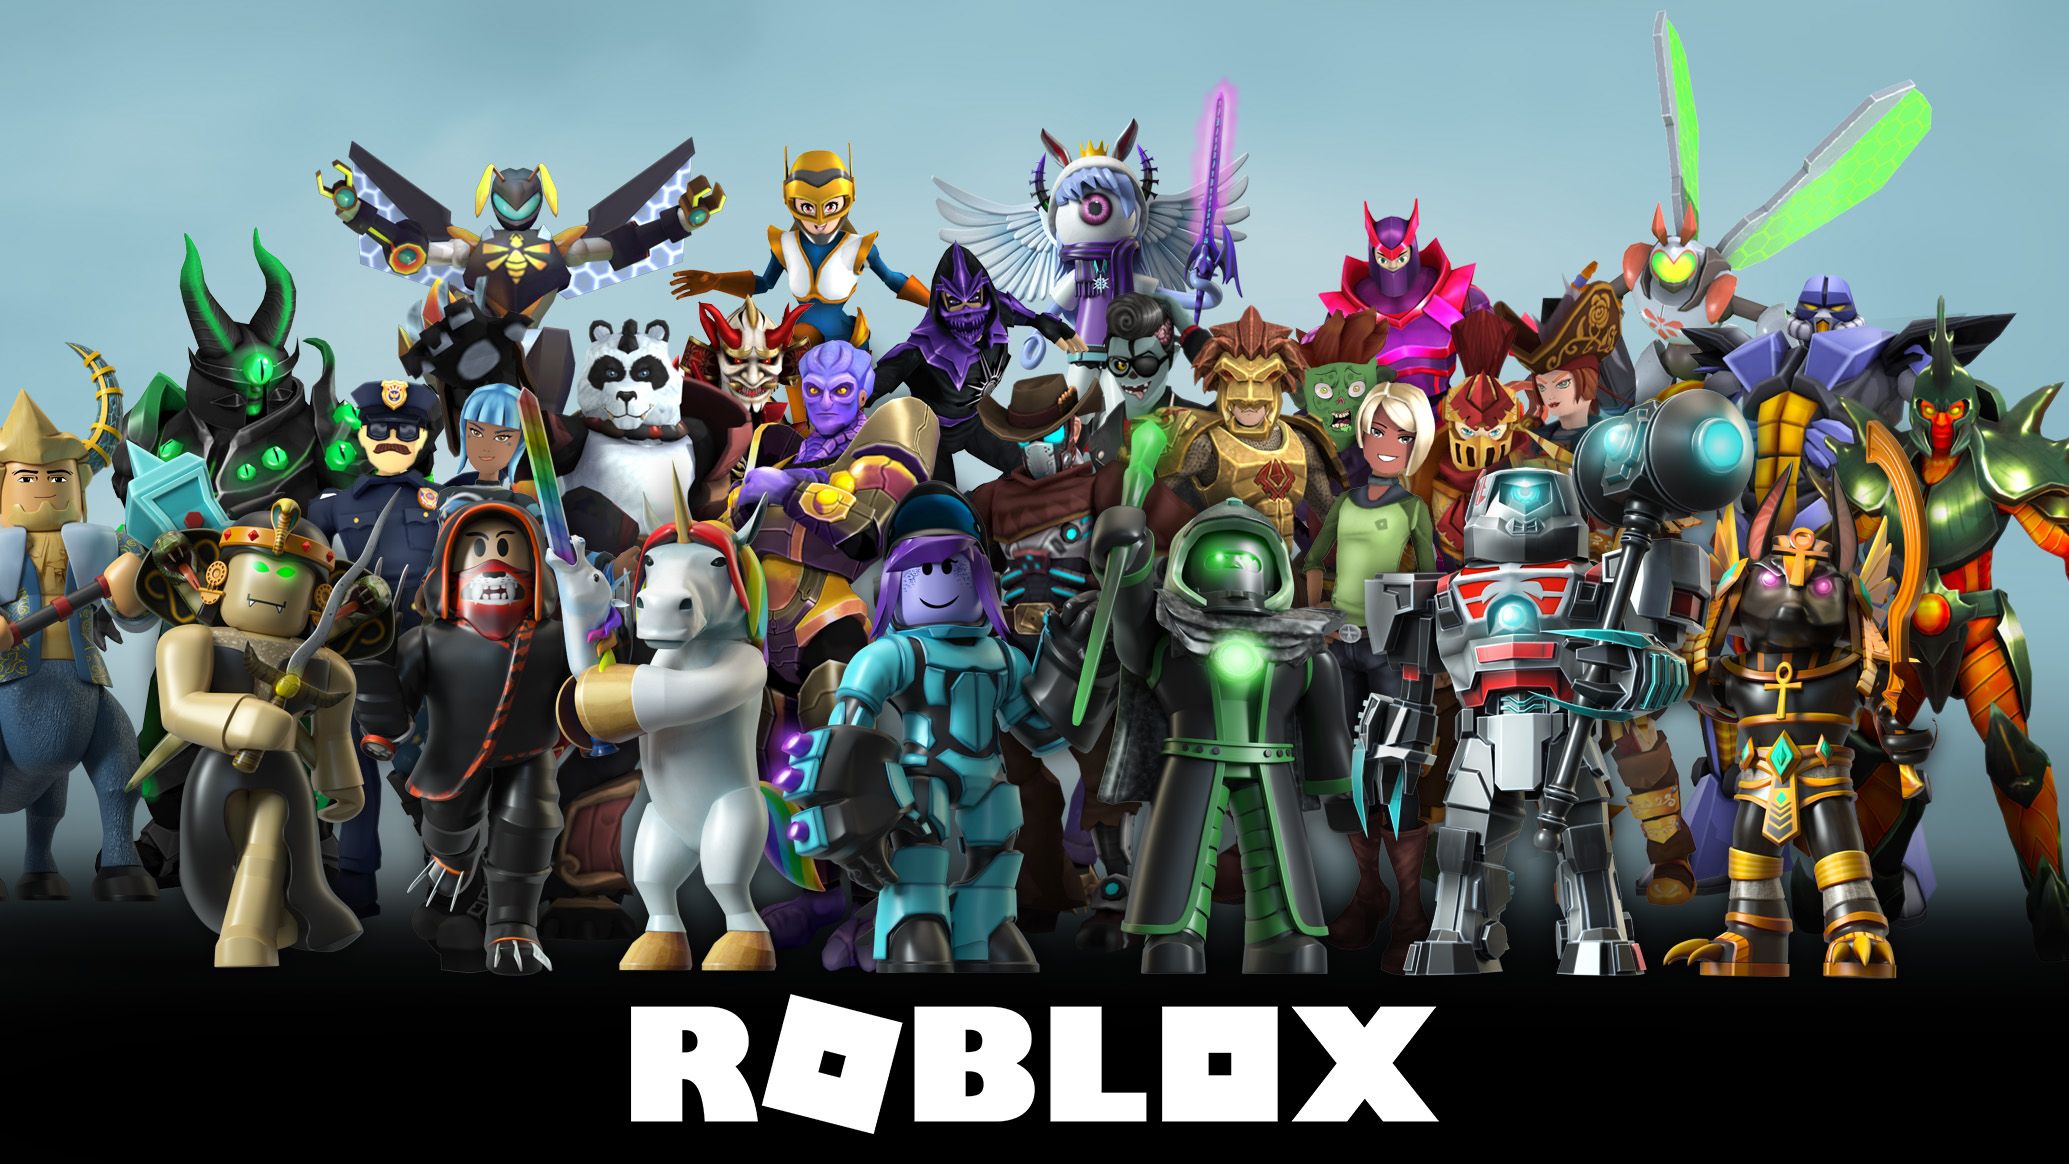 Roblox Metaverse; One of the Biggest Players in the Virtual Worlds